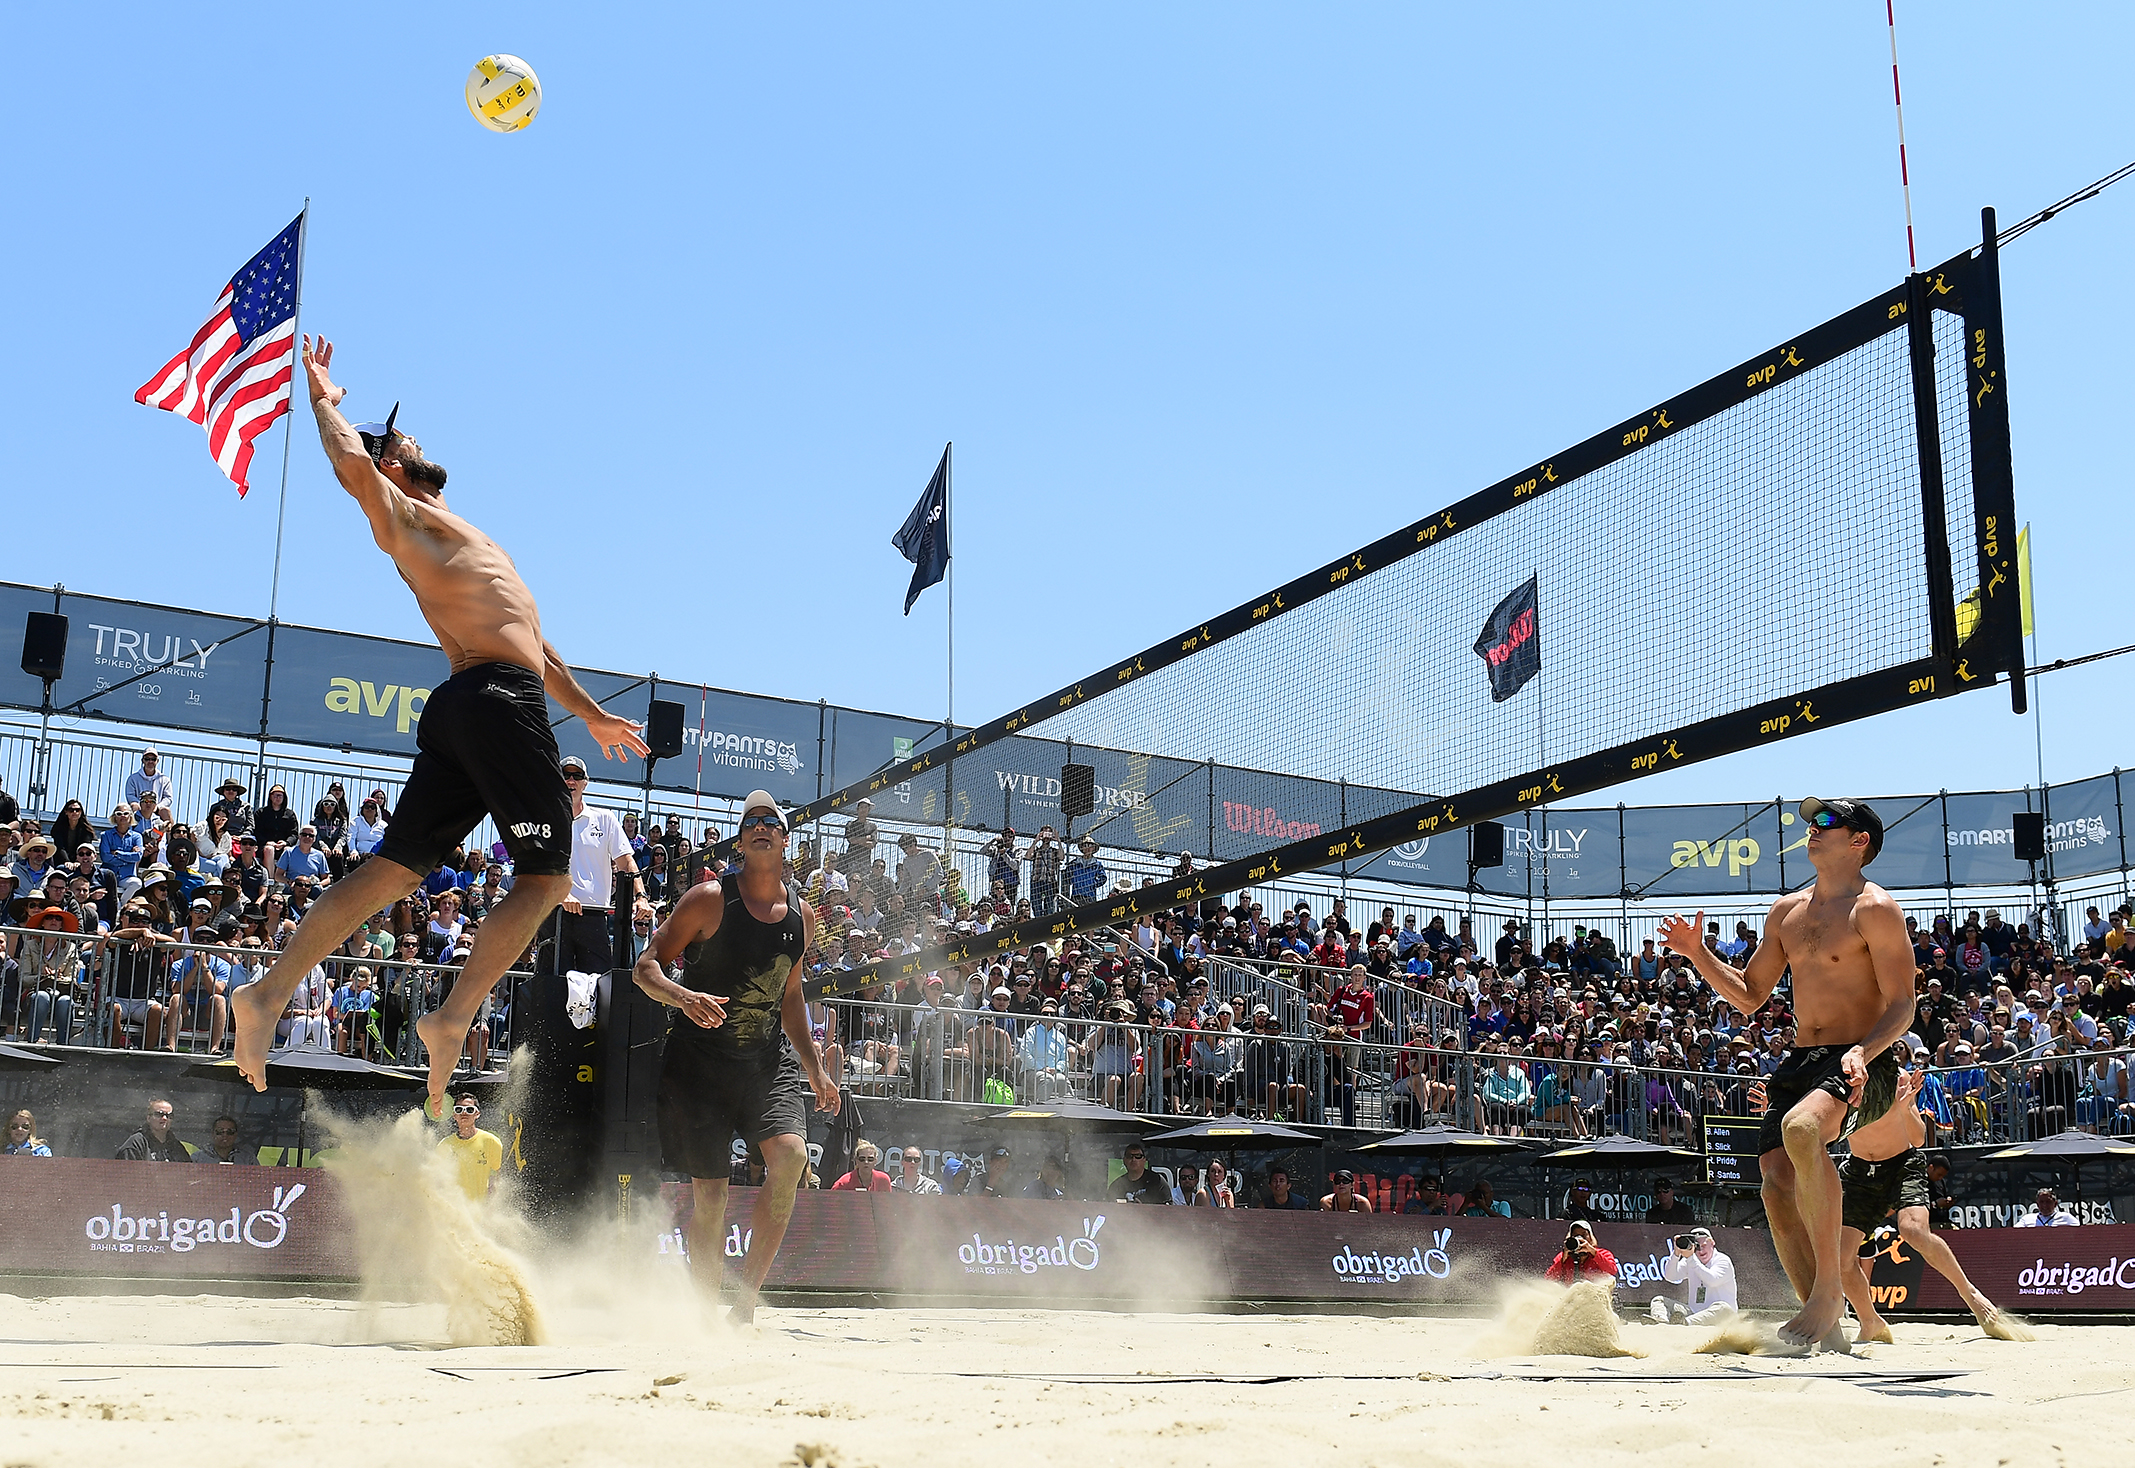 AVP Beach Volleyball Plans Comeback with Cup Series Next TV